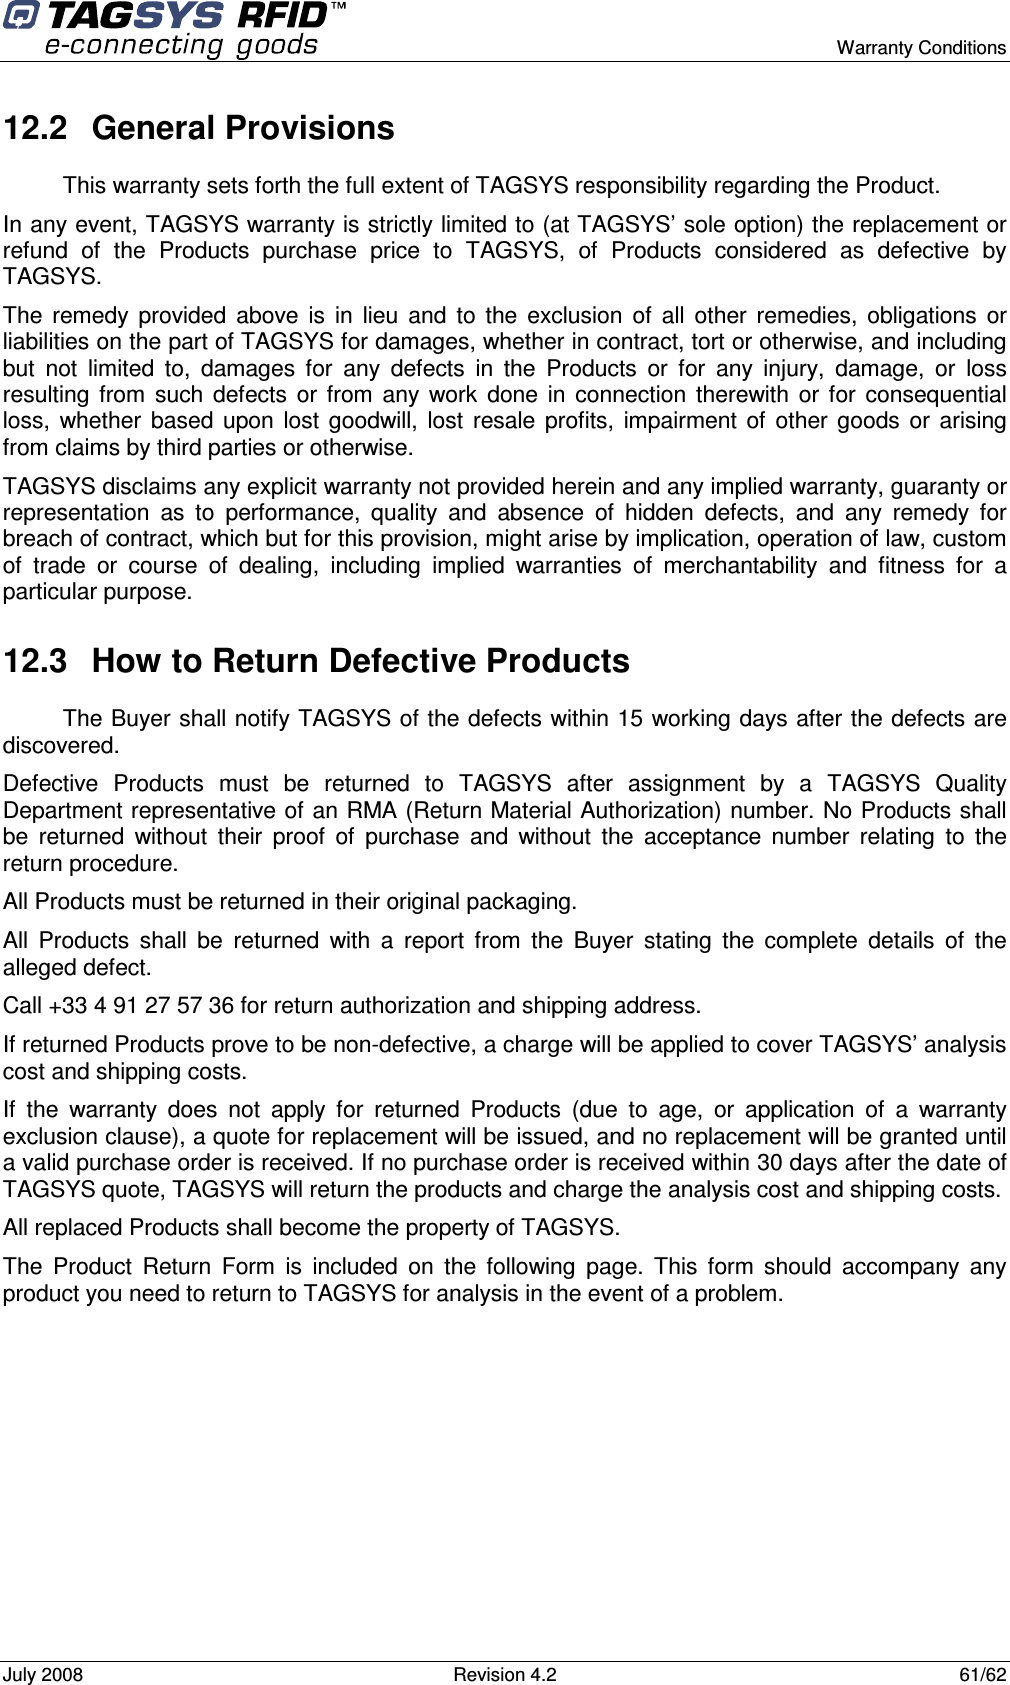      Warranty Conditions July 2008  Revision 4.2  61/62 12.2  General Provisions This warranty sets forth the full extent of TAGSYS responsibility regarding the Product. In any event, TAGSYS warranty is strictly limited to (at TAGSYS’ sole option) the replacement or refund  of  the  Products  purchase  price  to  TAGSYS,  of  Products  considered  as  defective  by TAGSYS. The  remedy  provided  above  is  in  lieu  and  to  the  exclusion  of  all  other  remedies,  obligations  or liabilities on the part of TAGSYS for damages, whether in contract, tort or otherwise, and including but  not  limited  to,  damages  for  any  defects  in  the  Products  or  for  any  injury,  damage,  or  loss resulting  from  such  defects  or  from  any  work  done  in  connection  therewith  or  for  consequential loss,  whether  based  upon  lost  goodwill,  lost  resale  profits,  impairment  of  other  goods  or  arising from claims by third parties or otherwise. TAGSYS disclaims any explicit warranty not provided herein and any implied warranty, guaranty or representation  as  to  performance,  quality  and  absence  of  hidden  defects,  and  any  remedy  for breach of contract, which but for this provision, might arise by implication, operation of law, custom of  trade  or  course  of  dealing,  including  implied  warranties  of  merchantability  and  fitness  for  a particular purpose. 12.3  How to Return Defective Products The Buyer shall notify TAGSYS of the defects within 15 working days after the defects are discovered. Defective  Products  must  be  returned  to  TAGSYS  after  assignment  by  a  TAGSYS  Quality Department representative of an RMA (Return Material Authorization) number. No Products shall be  returned  without  their  proof  of  purchase  and  without  the  acceptance  number  relating  to  the return procedure. All Products must be returned in their original packaging. All  Products  shall  be  returned  with  a  report  from  the  Buyer  stating  the  complete  details  of  the alleged defect. Call +33 4 91 27 57 36 for return authorization and shipping address. If returned Products prove to be non-defective, a charge will be applied to cover TAGSYS’ analysis cost and shipping costs. If  the  warranty  does  not  apply  for  returned  Products  (due  to  age,  or  application  of  a  warranty exclusion clause), a quote for replacement will be issued, and no replacement will be granted until a valid purchase order is received. If no purchase order is received within 30 days after the date of TAGSYS quote, TAGSYS will return the products and charge the analysis cost and shipping costs. All replaced Products shall become the property of TAGSYS. The  Product  Return  Form  is  included  on  the  following  page.  This  form  should  accompany  any product you need to return to TAGSYS for analysis in the event of a problem.        